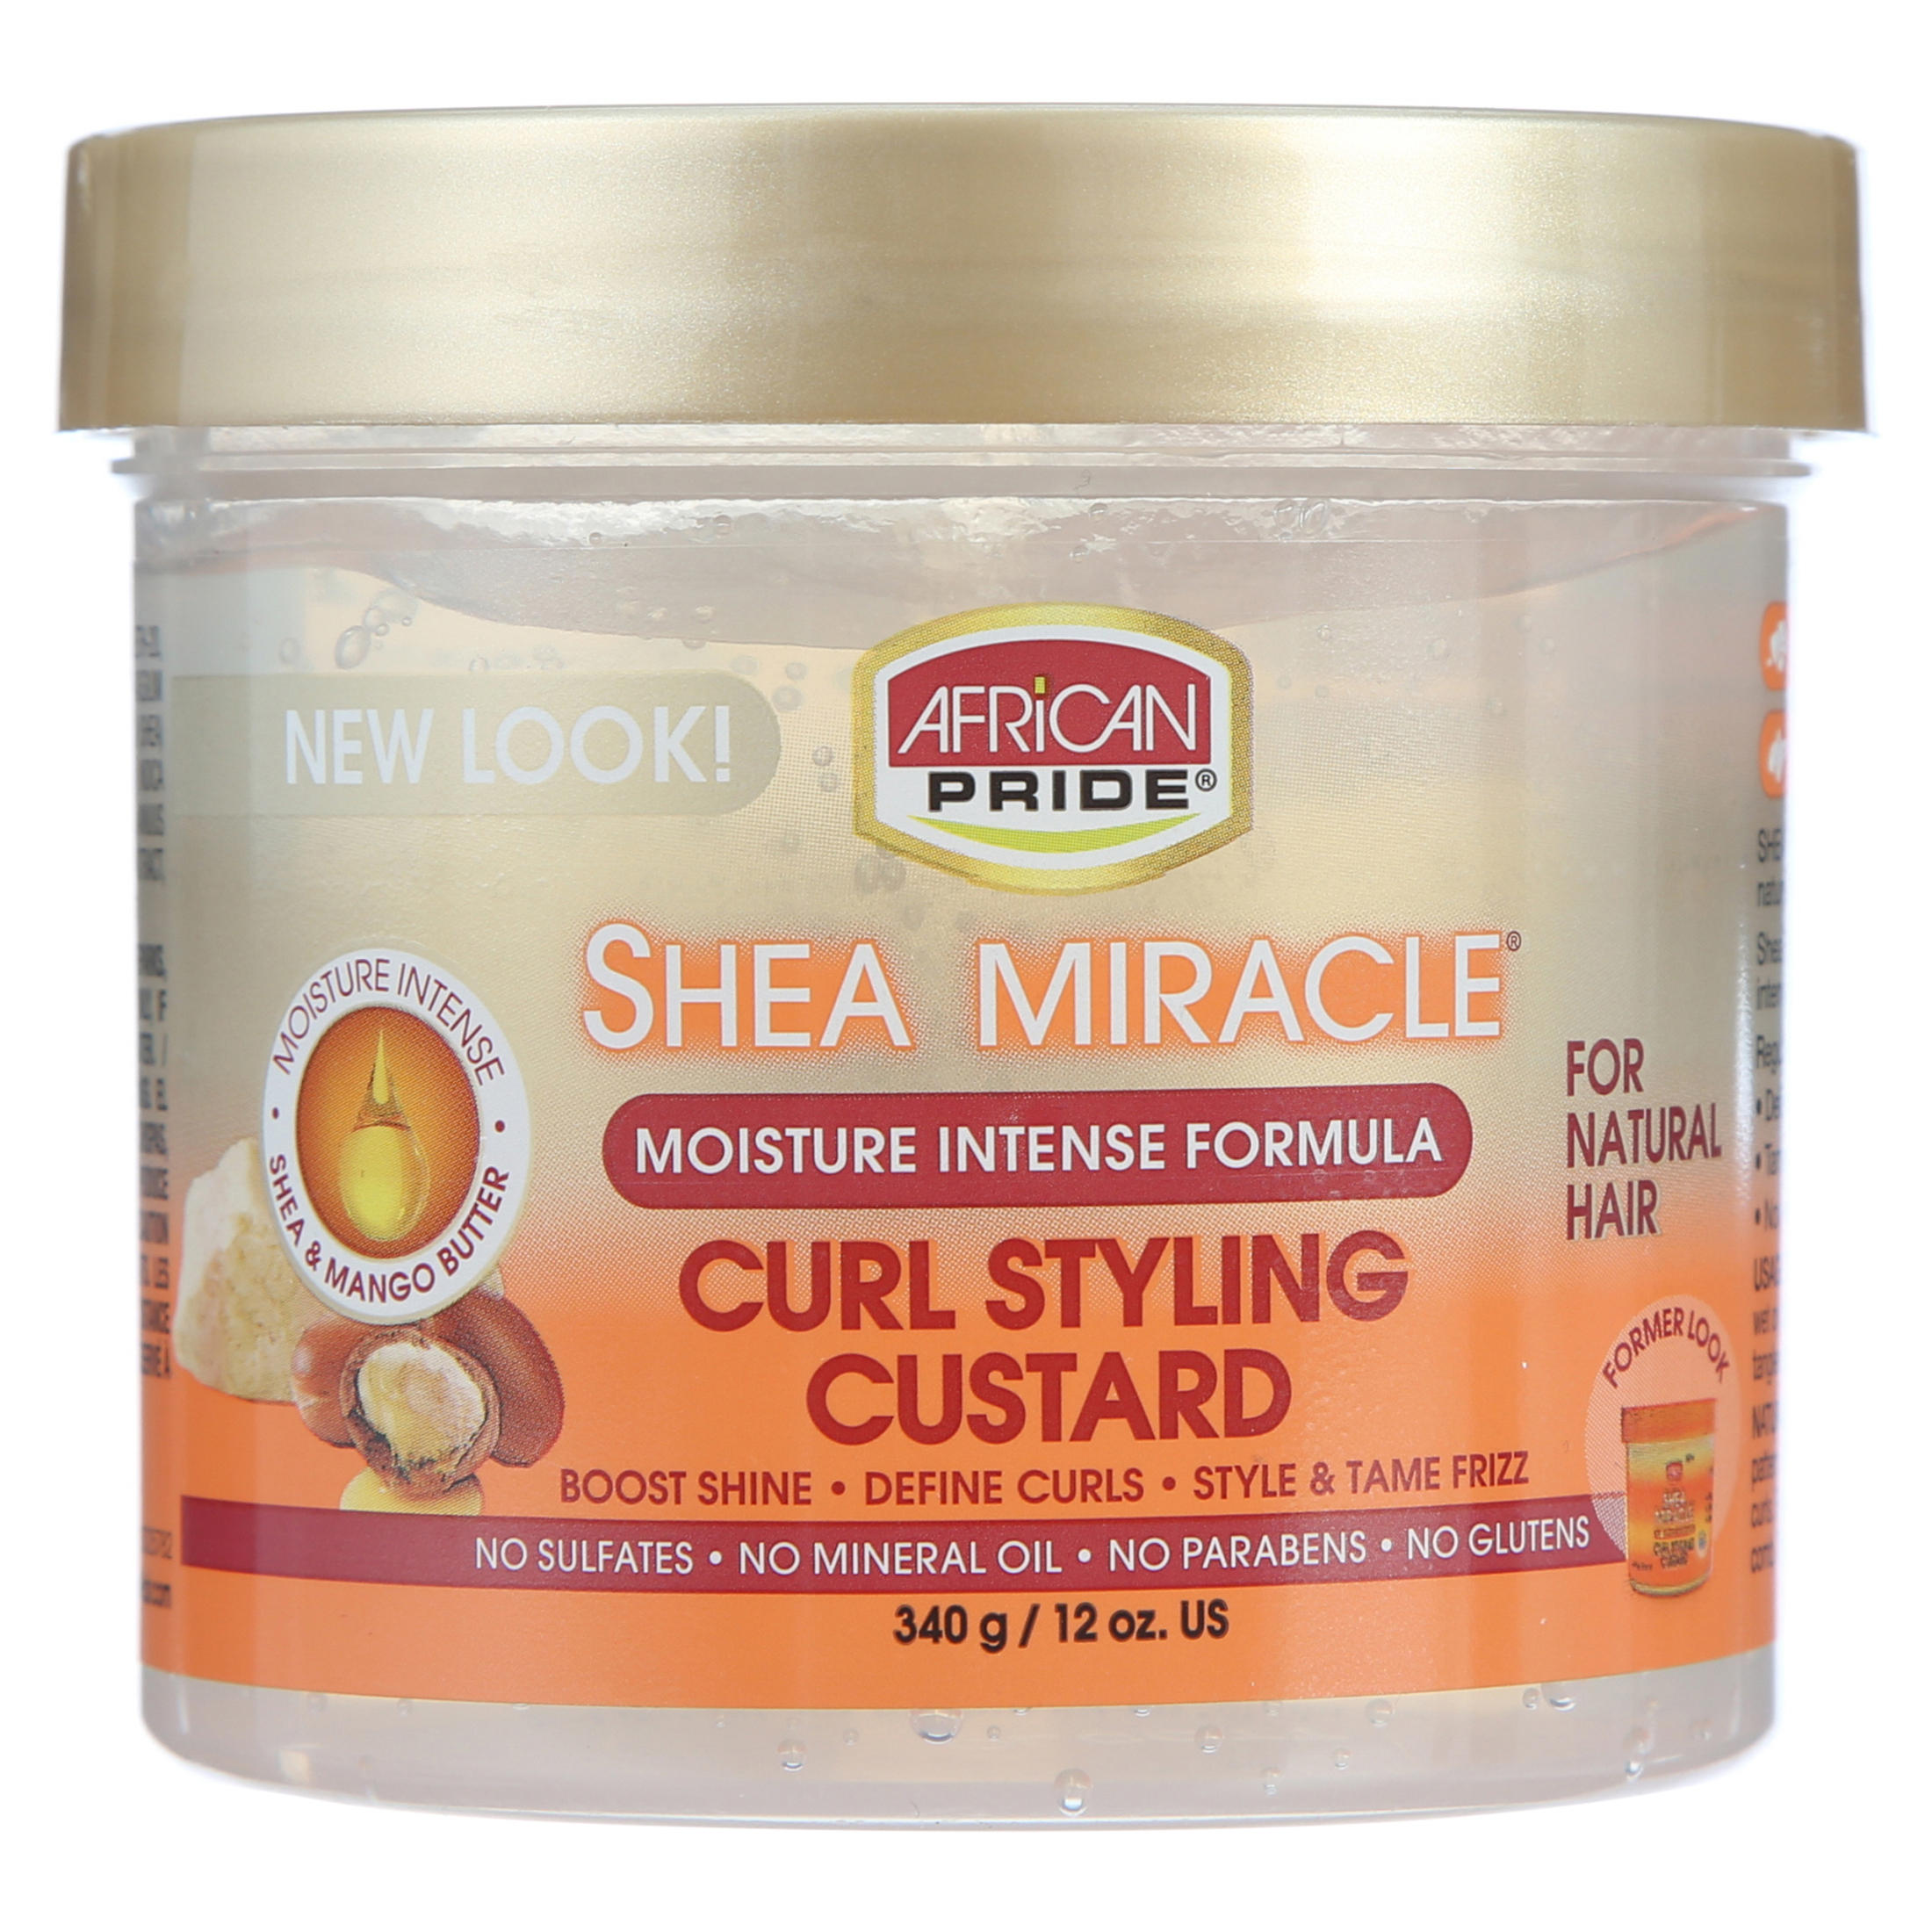 African Pride Curl Styling Cream Custard for Wavy, Curly, Coily Hair with Shea Butter, 12 oz. - image 1 of 5